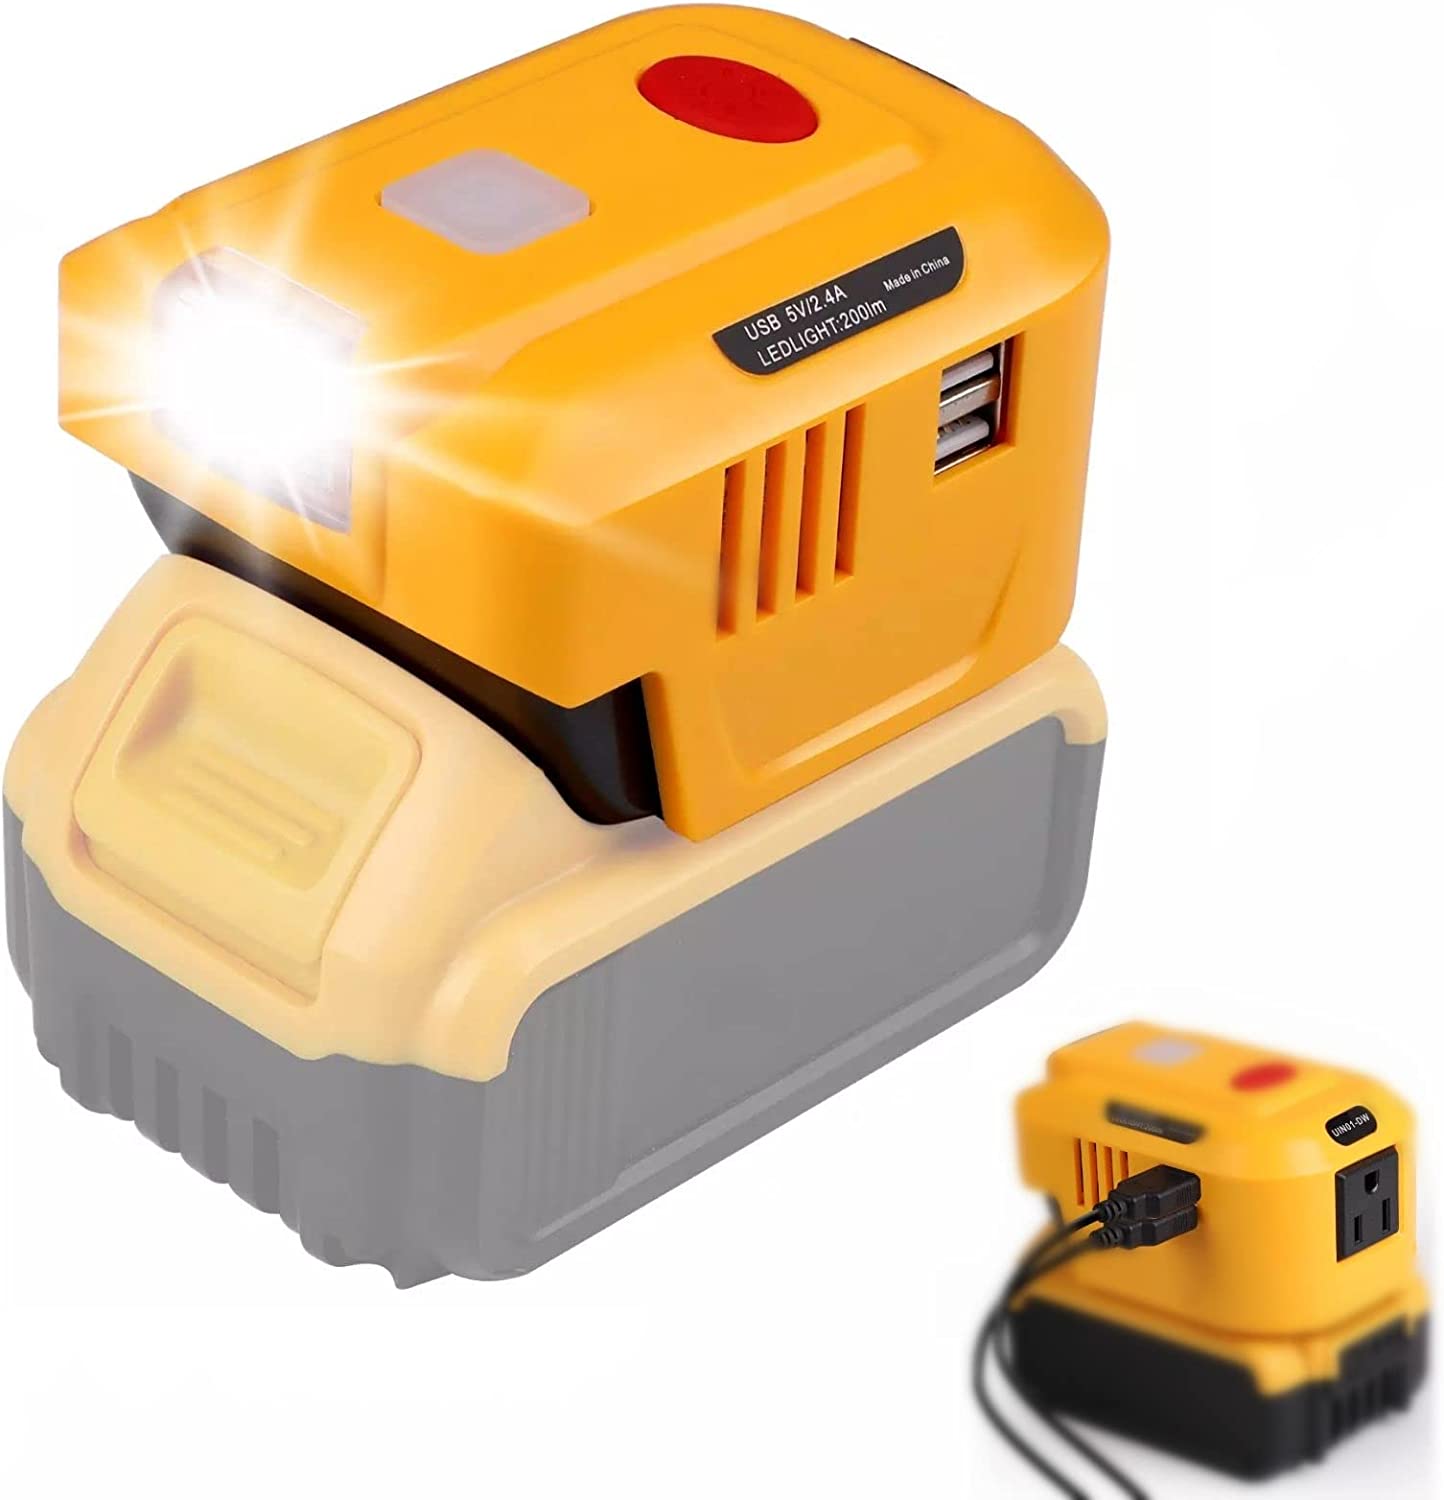 Discover the Power of the Latest Fire Rescue Tool Batteries